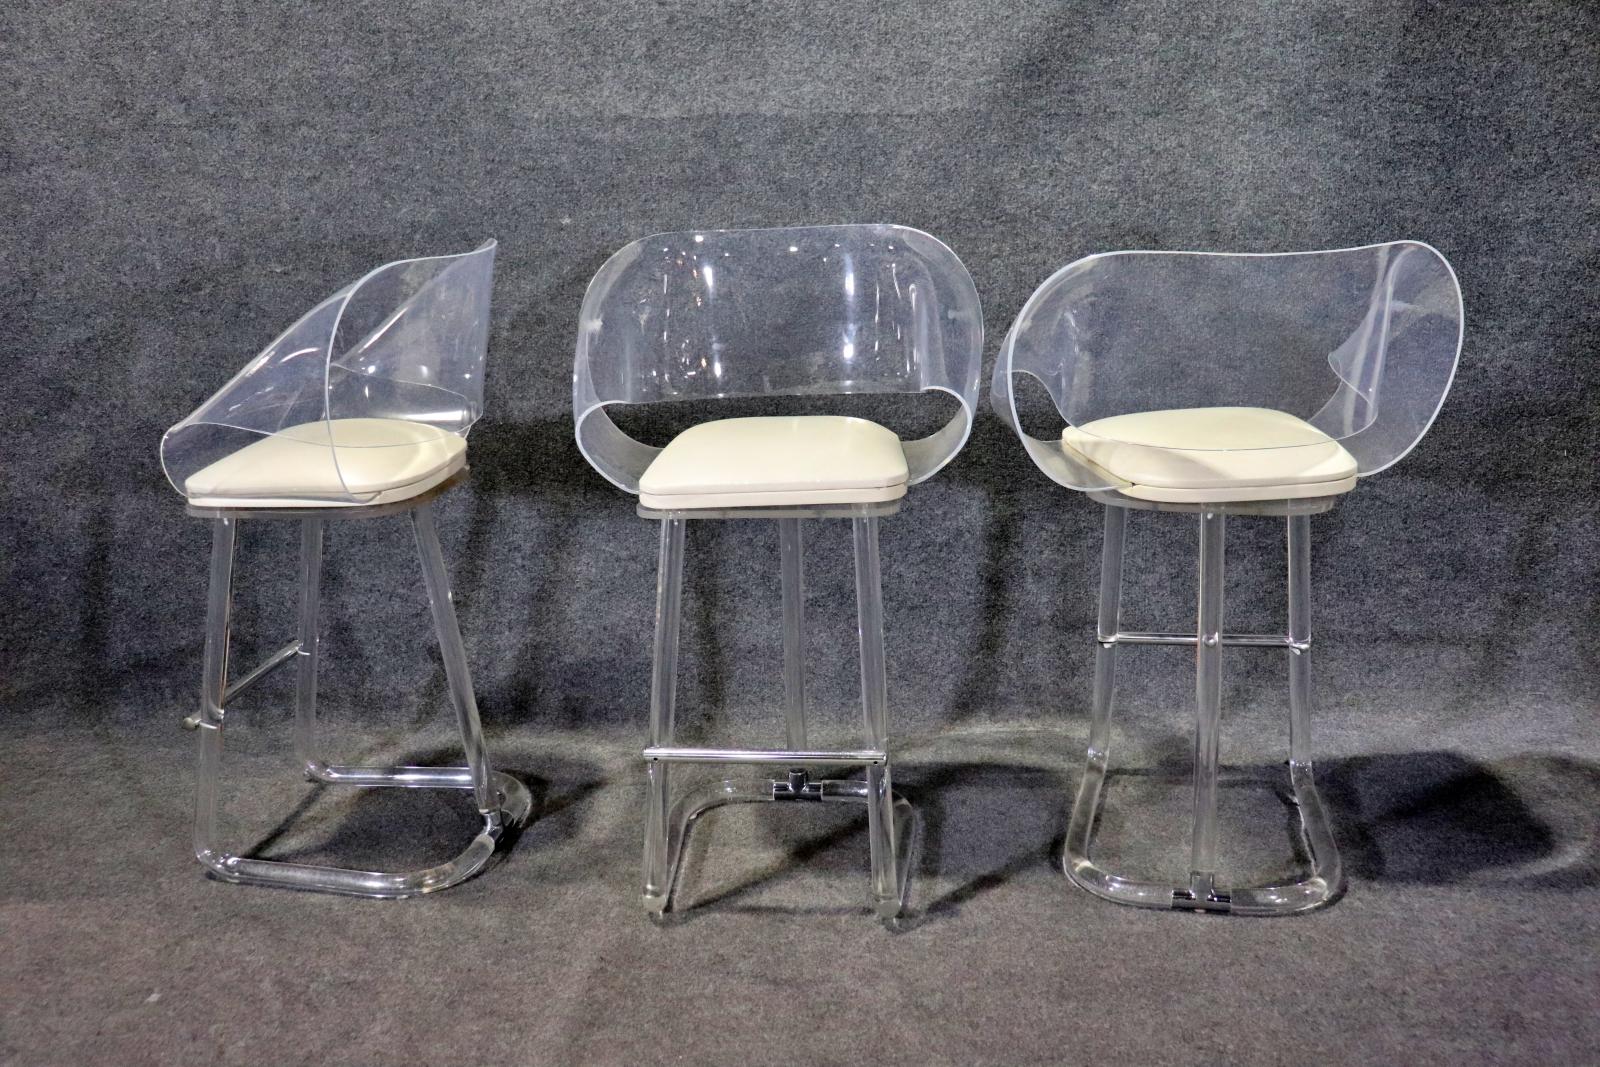 Four mid-century modern counter stools with lucite frame and clear bent backs.
Please confirm location NY or NJ